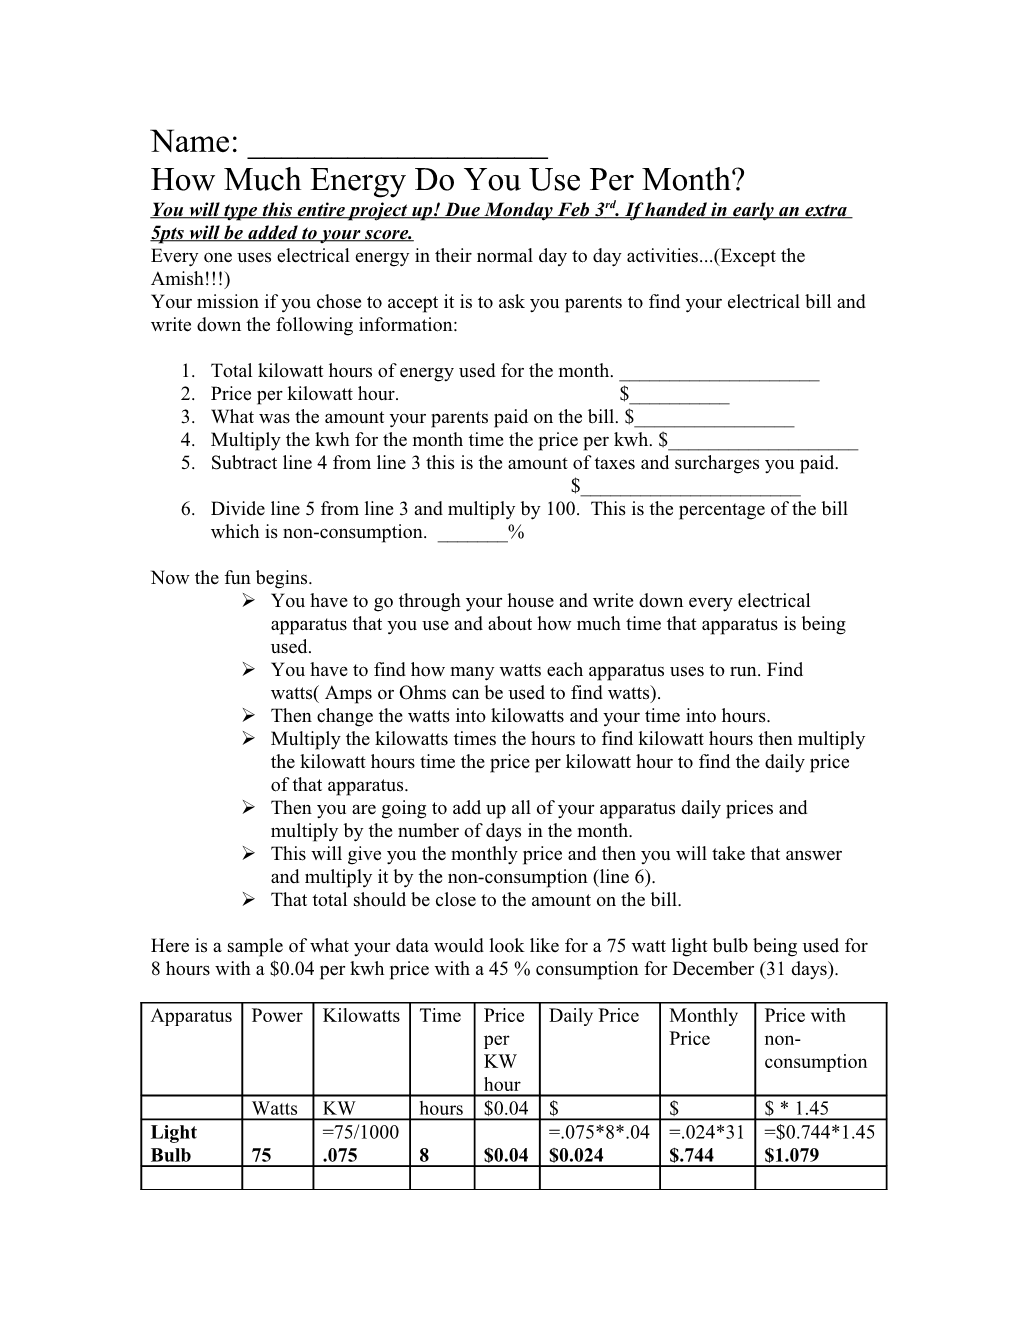 How Much Energy Do You Use Per Month